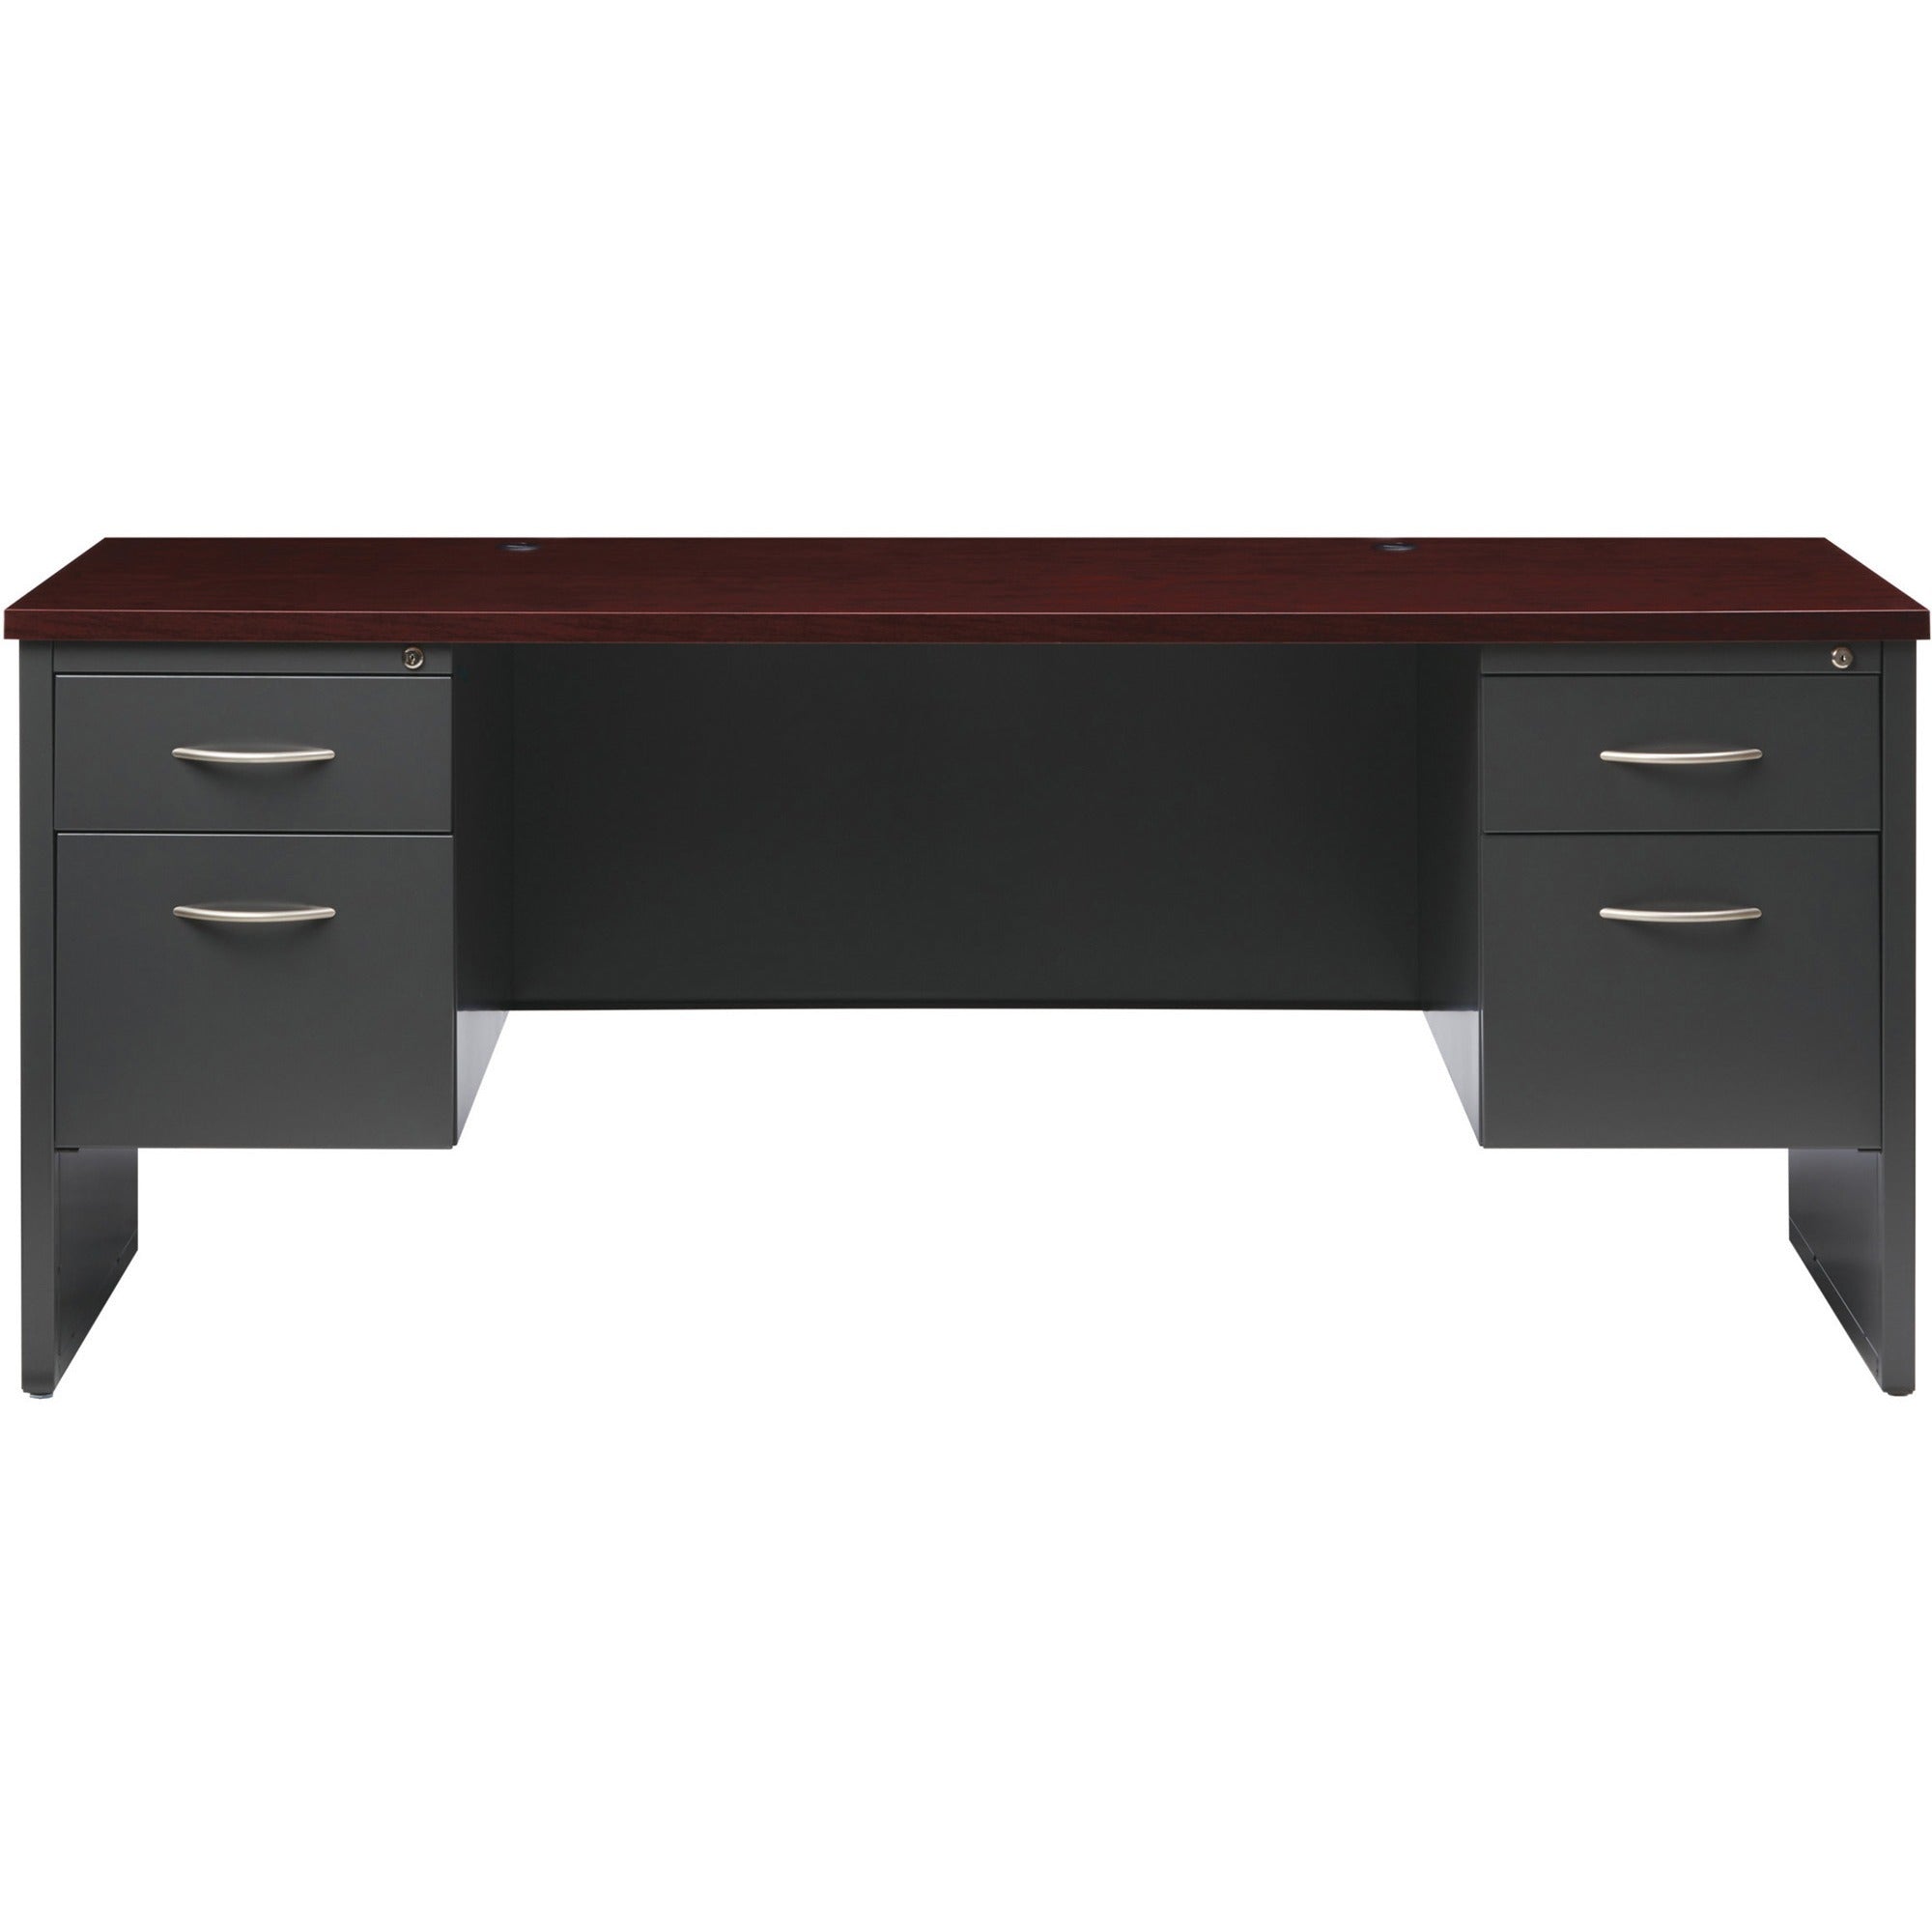 Lorell Fortress Modular Series Double-pedestal Credenza - 72" x 24" , 1.1" Top - 2 x Box, File Drawer(s) - Double Pedestal - Material: Steel - Finish: Mahogany Laminate, Charcoal - Scratch Resistant, Stain Resistant, Ball-bearing Suspension, Grommet, - 